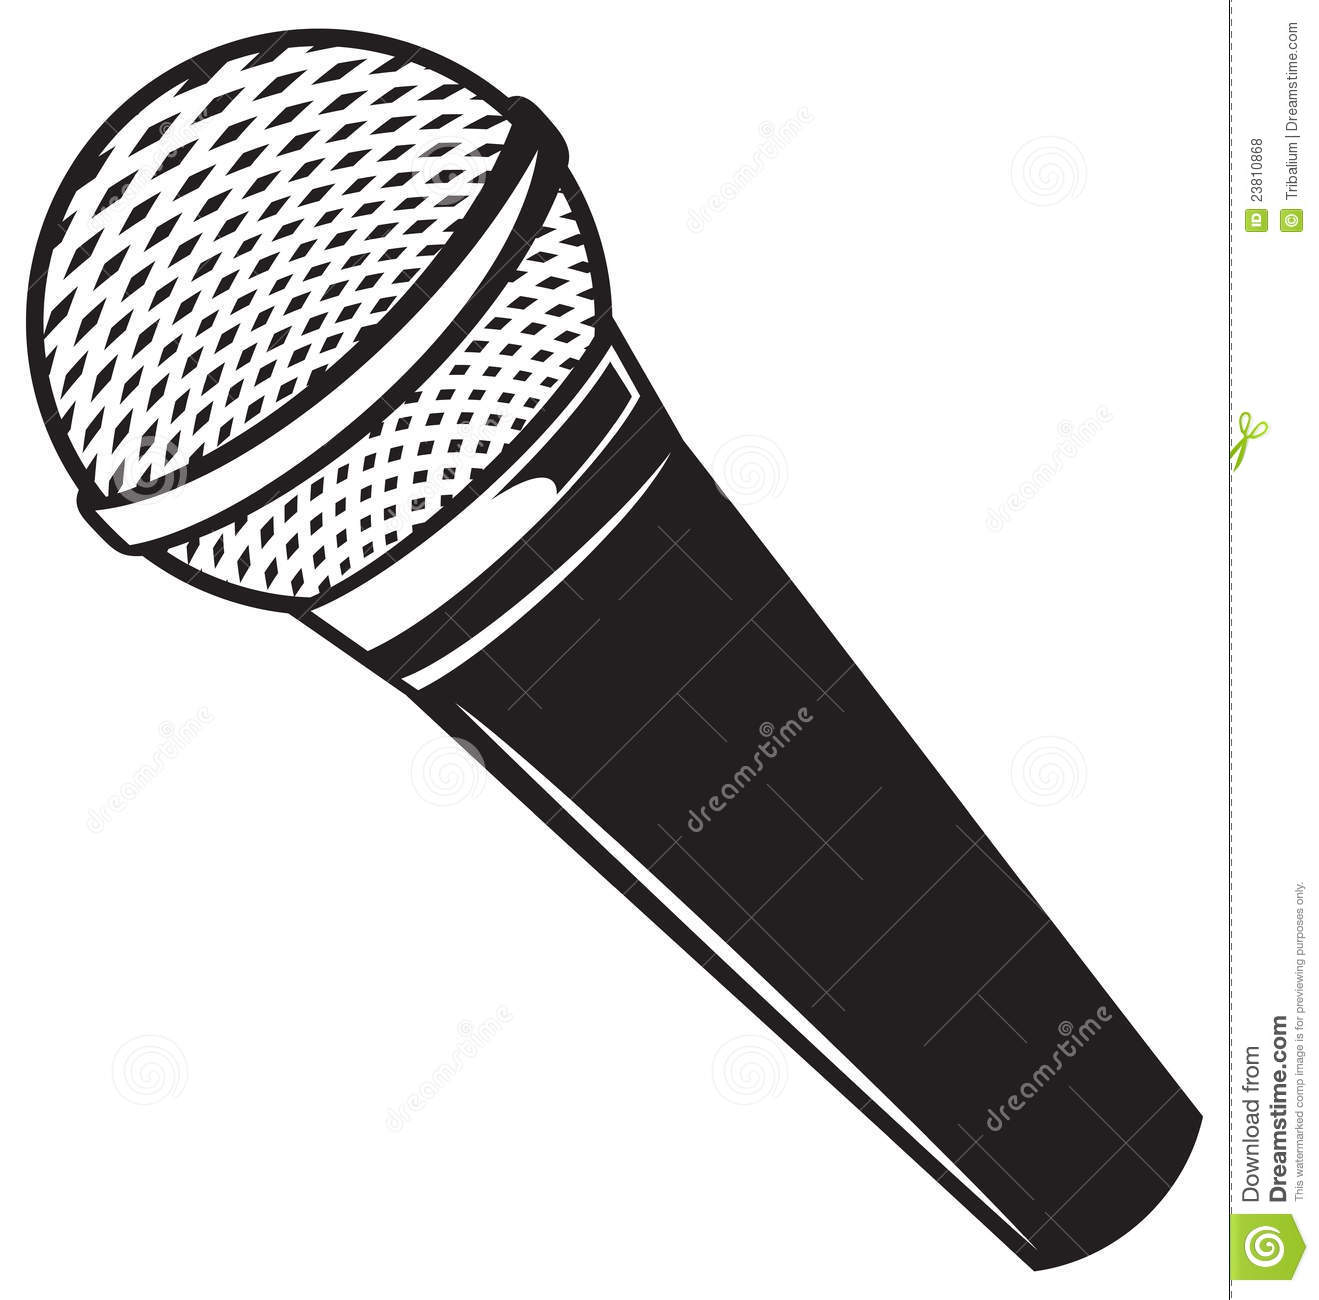 Interview Microphone Clipart   Cliparthut   Free Clipart